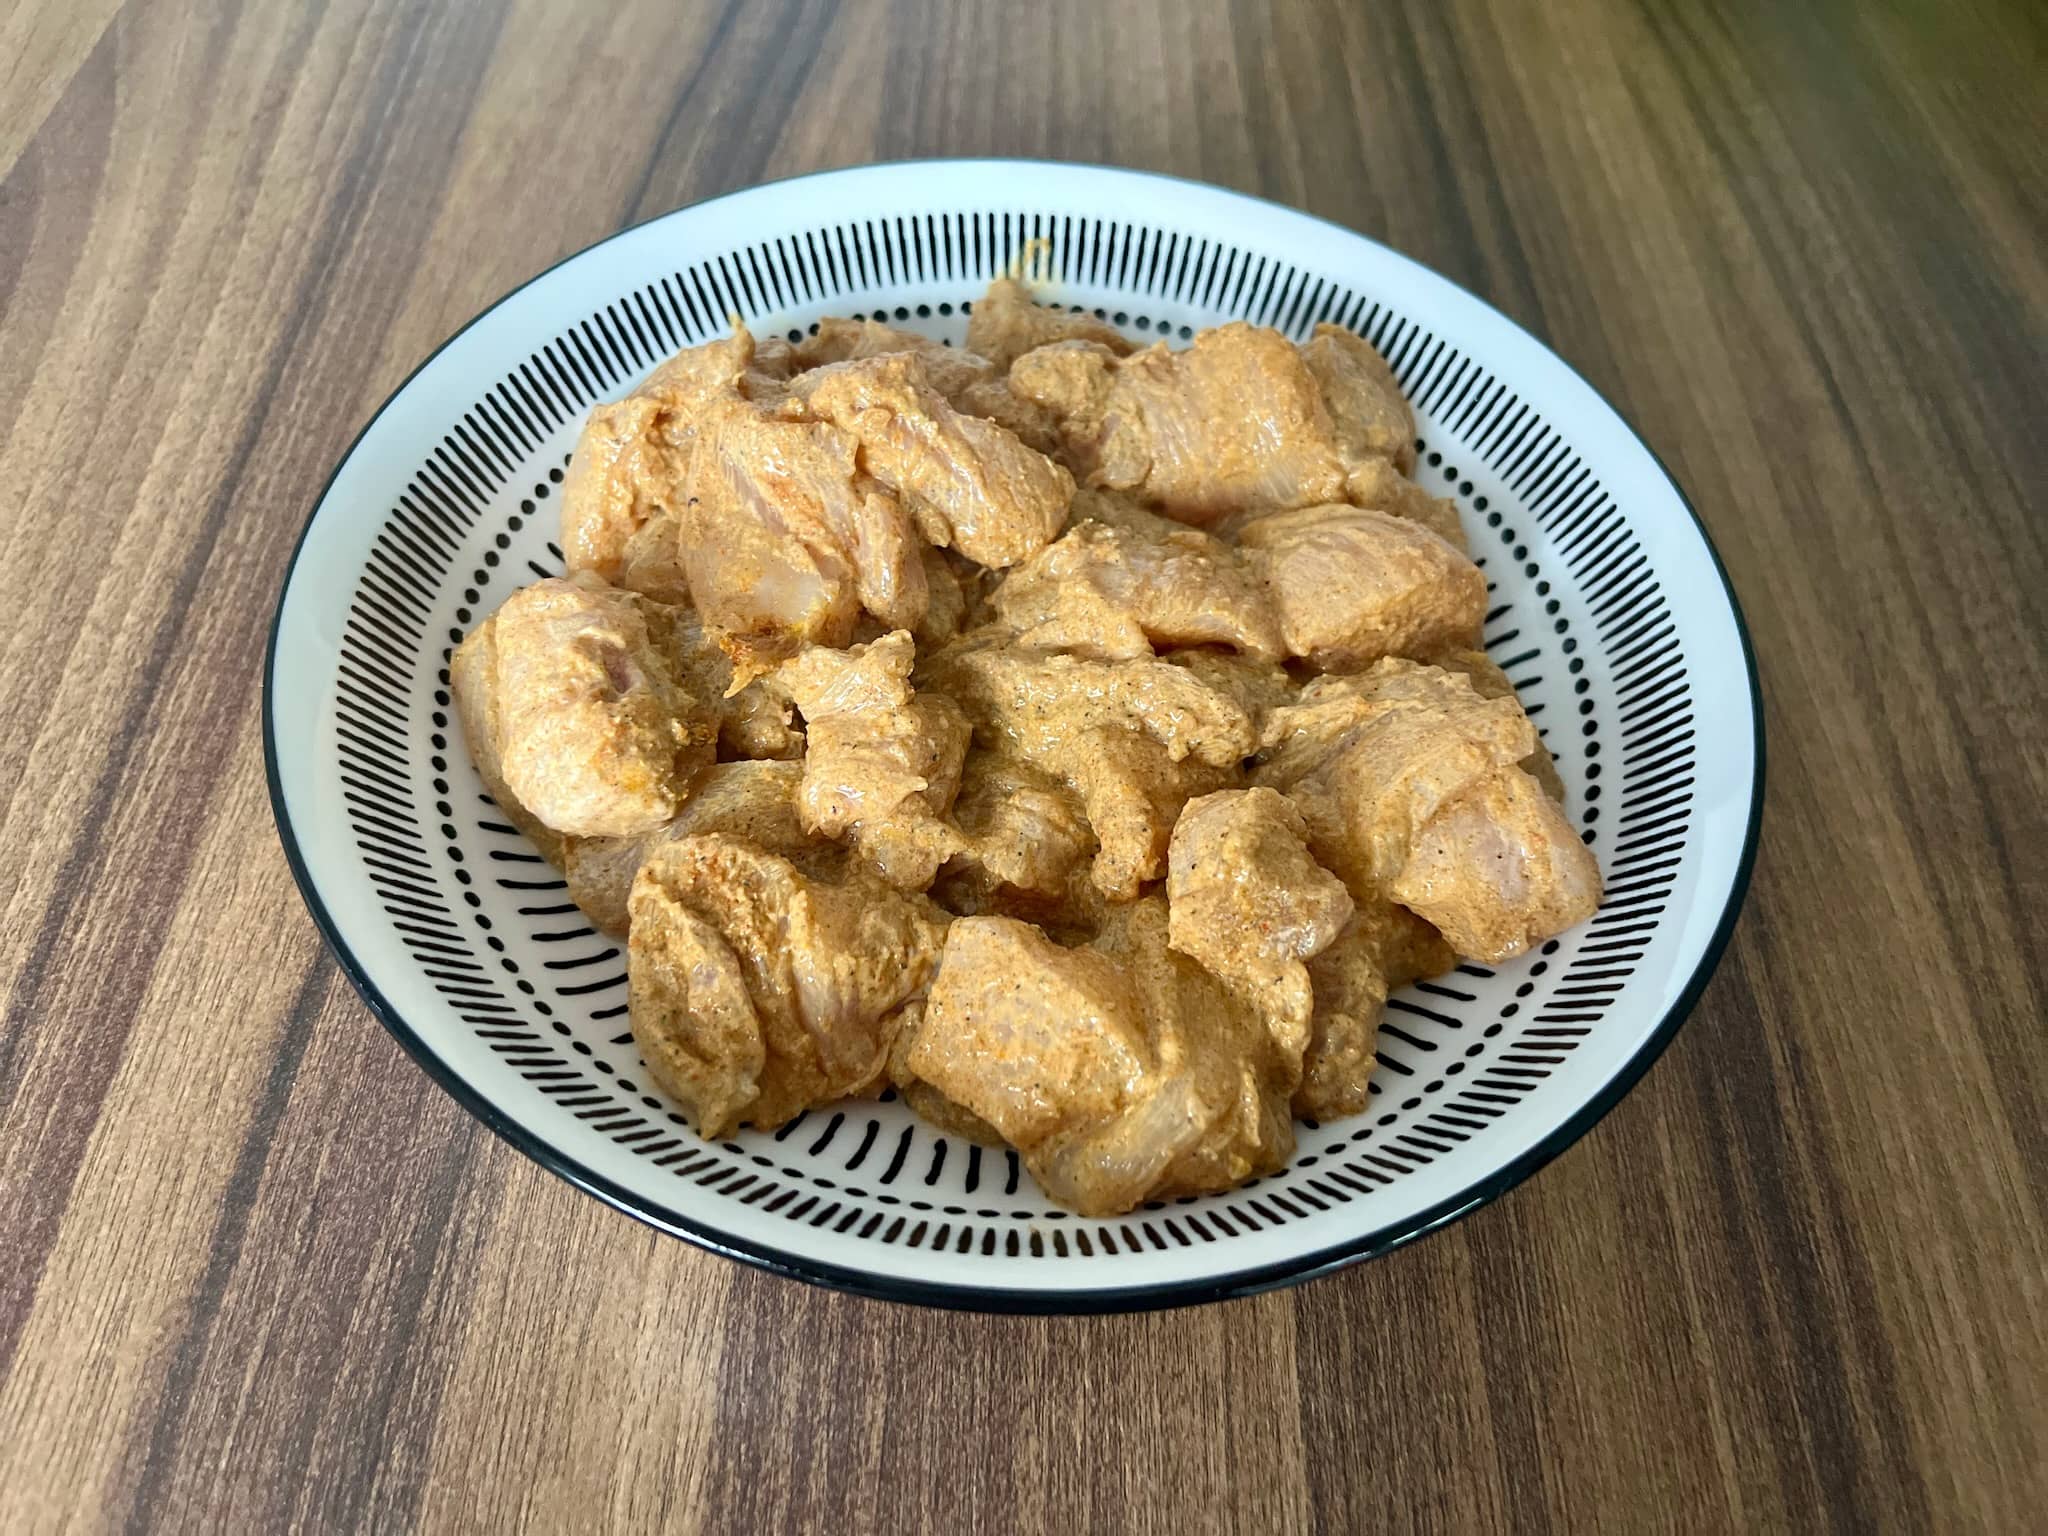 Marinated chicken cubes in a bowl